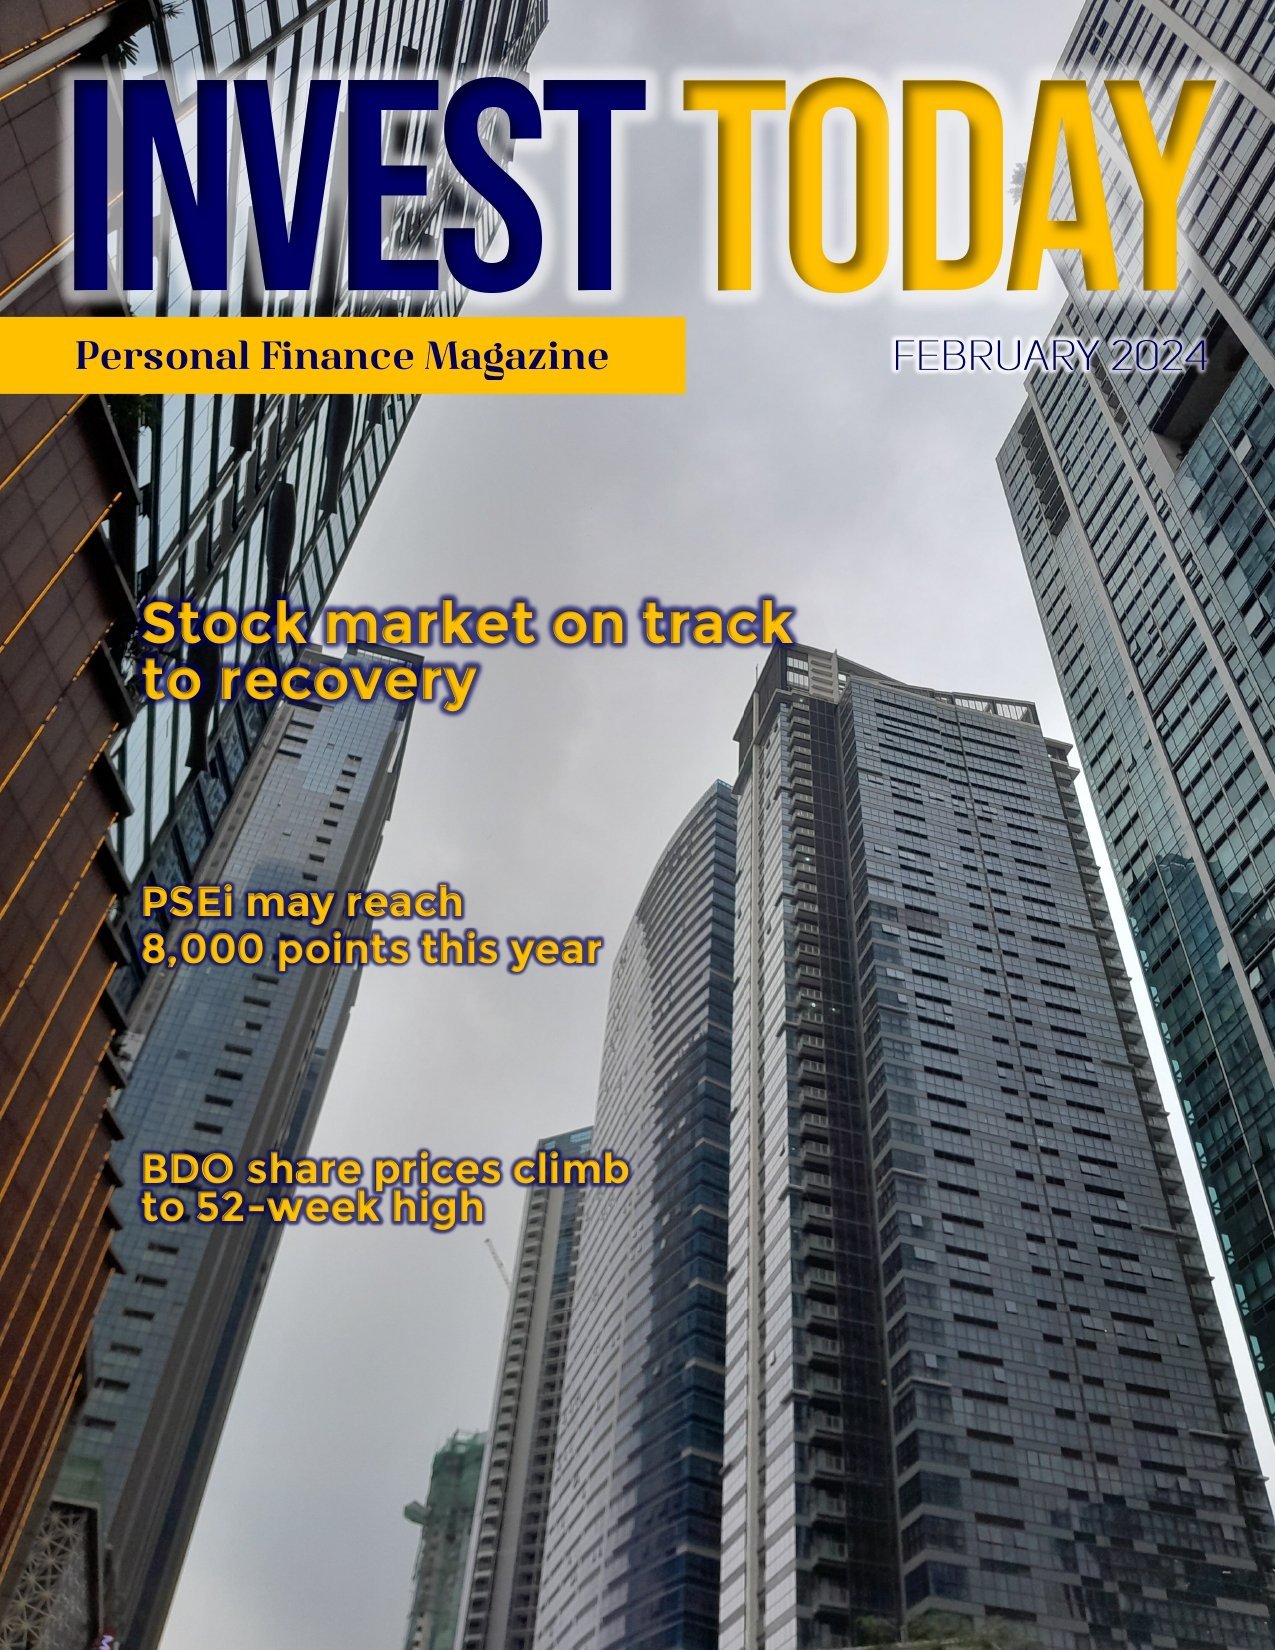 Read the second issue of Invest Today